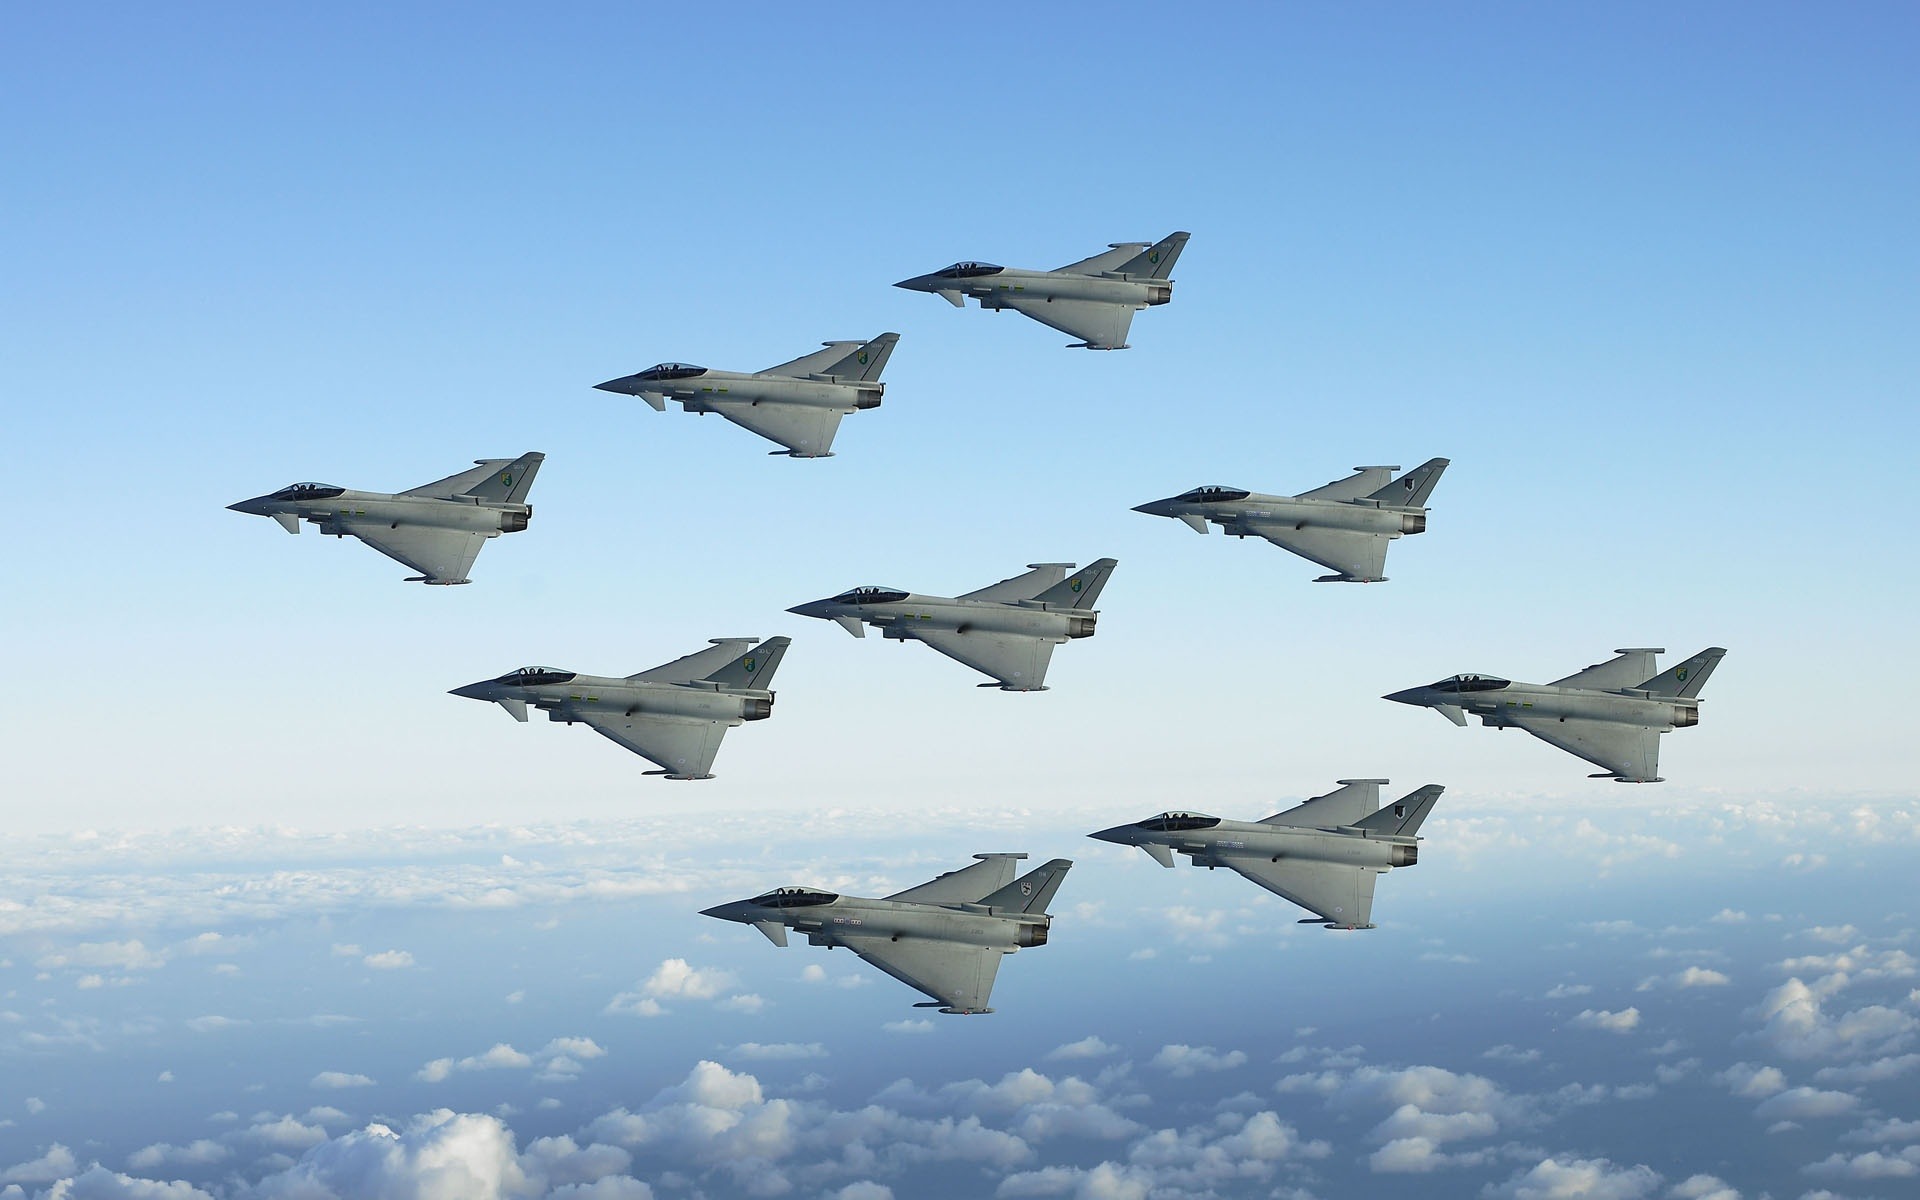 Military Fighter Jets Hd Wallpapers in Aircraft Imagescicom